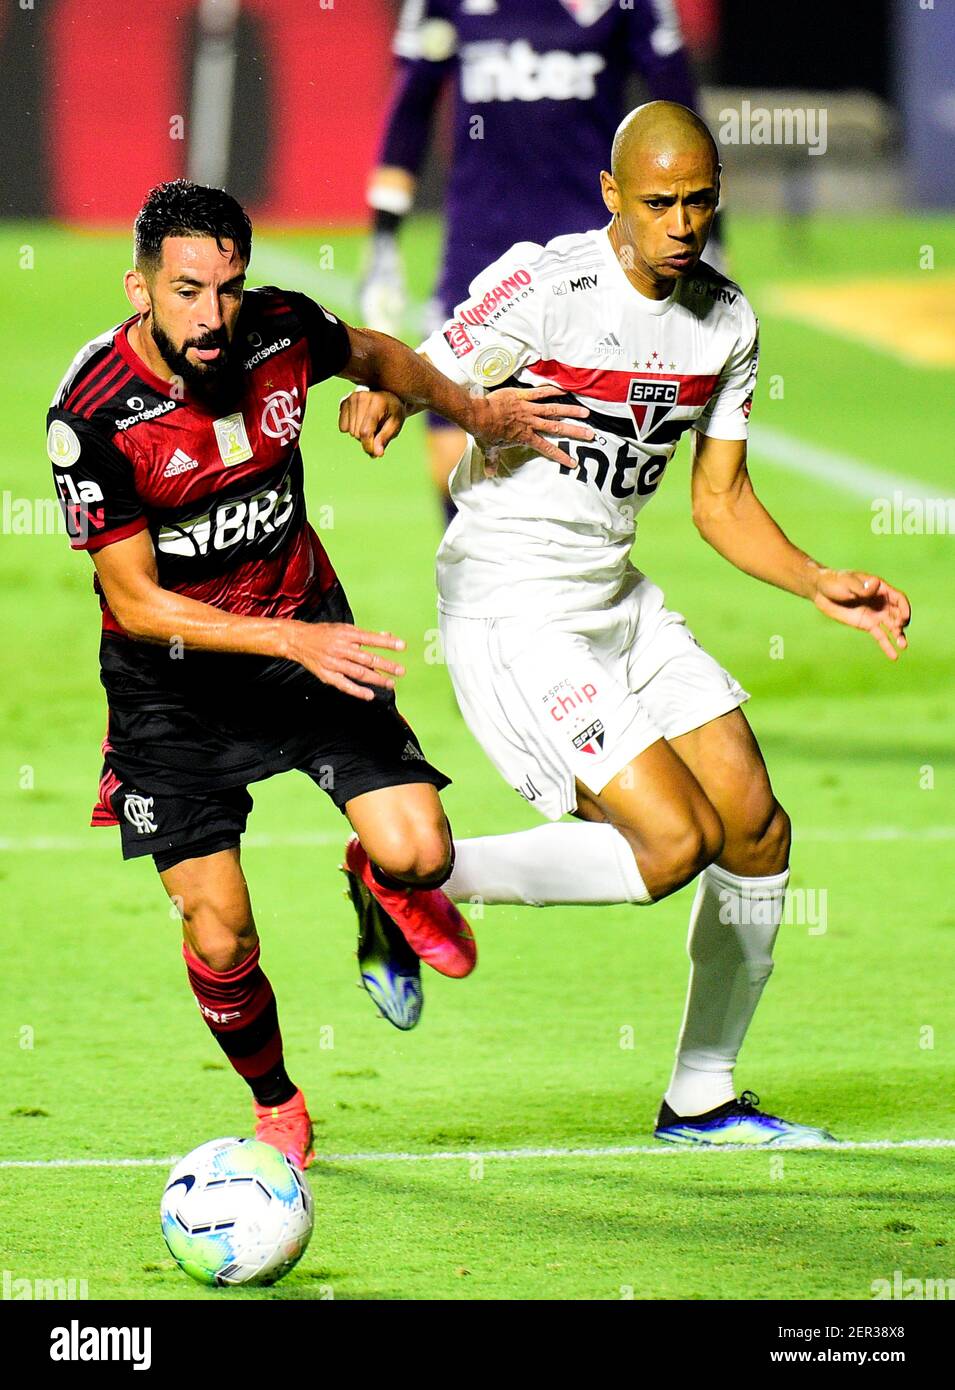 SAO PAULO, BRAZIL - FEBRUARY 25: Mauricio Isla of CR Flamengo competes for the ball with Bruno Alves of Sao Paulo FC ,during the Brasileirao Serie A 2020 match between Sao Paulo FC and CR Flamengo at Morumbi Stadium on February 25, 2021 in Sao Paulo, Brazil. (Photo by MB Media/BPA) Stock Photo